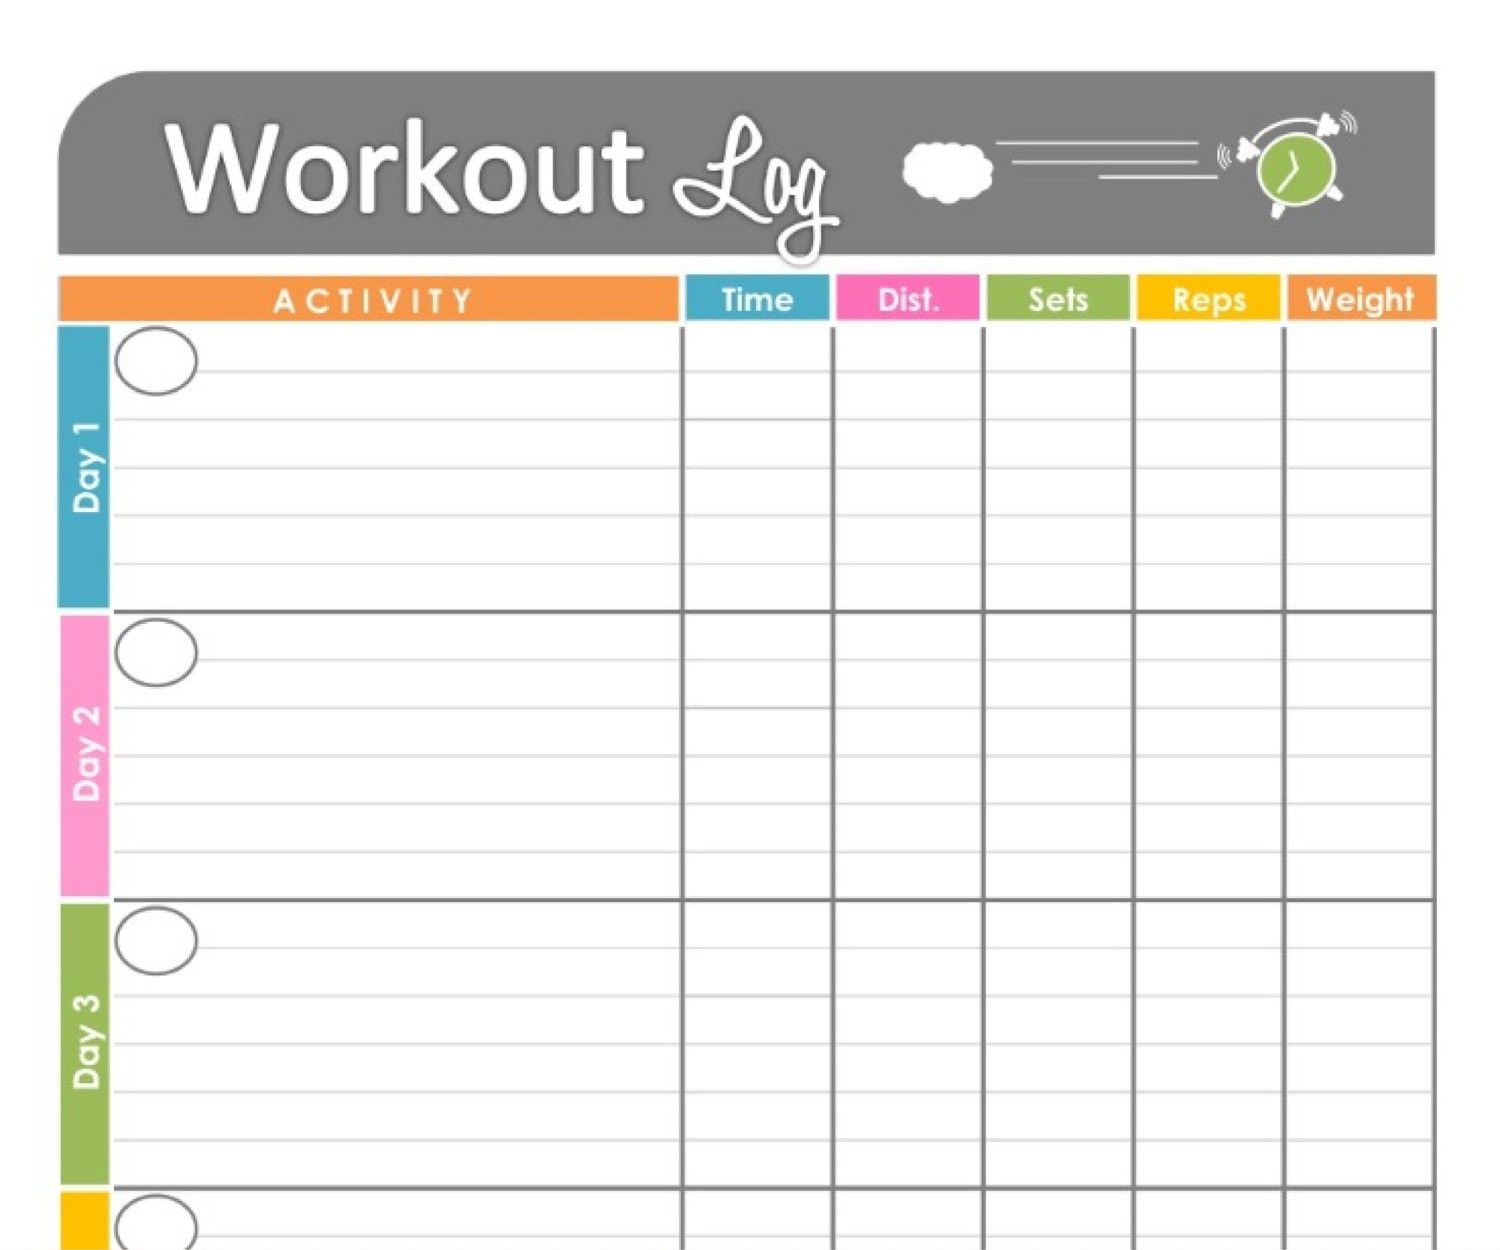 Pinkristy Winburn Revels On School Planners & Supplies Intended For Blank Workout Schedule Template